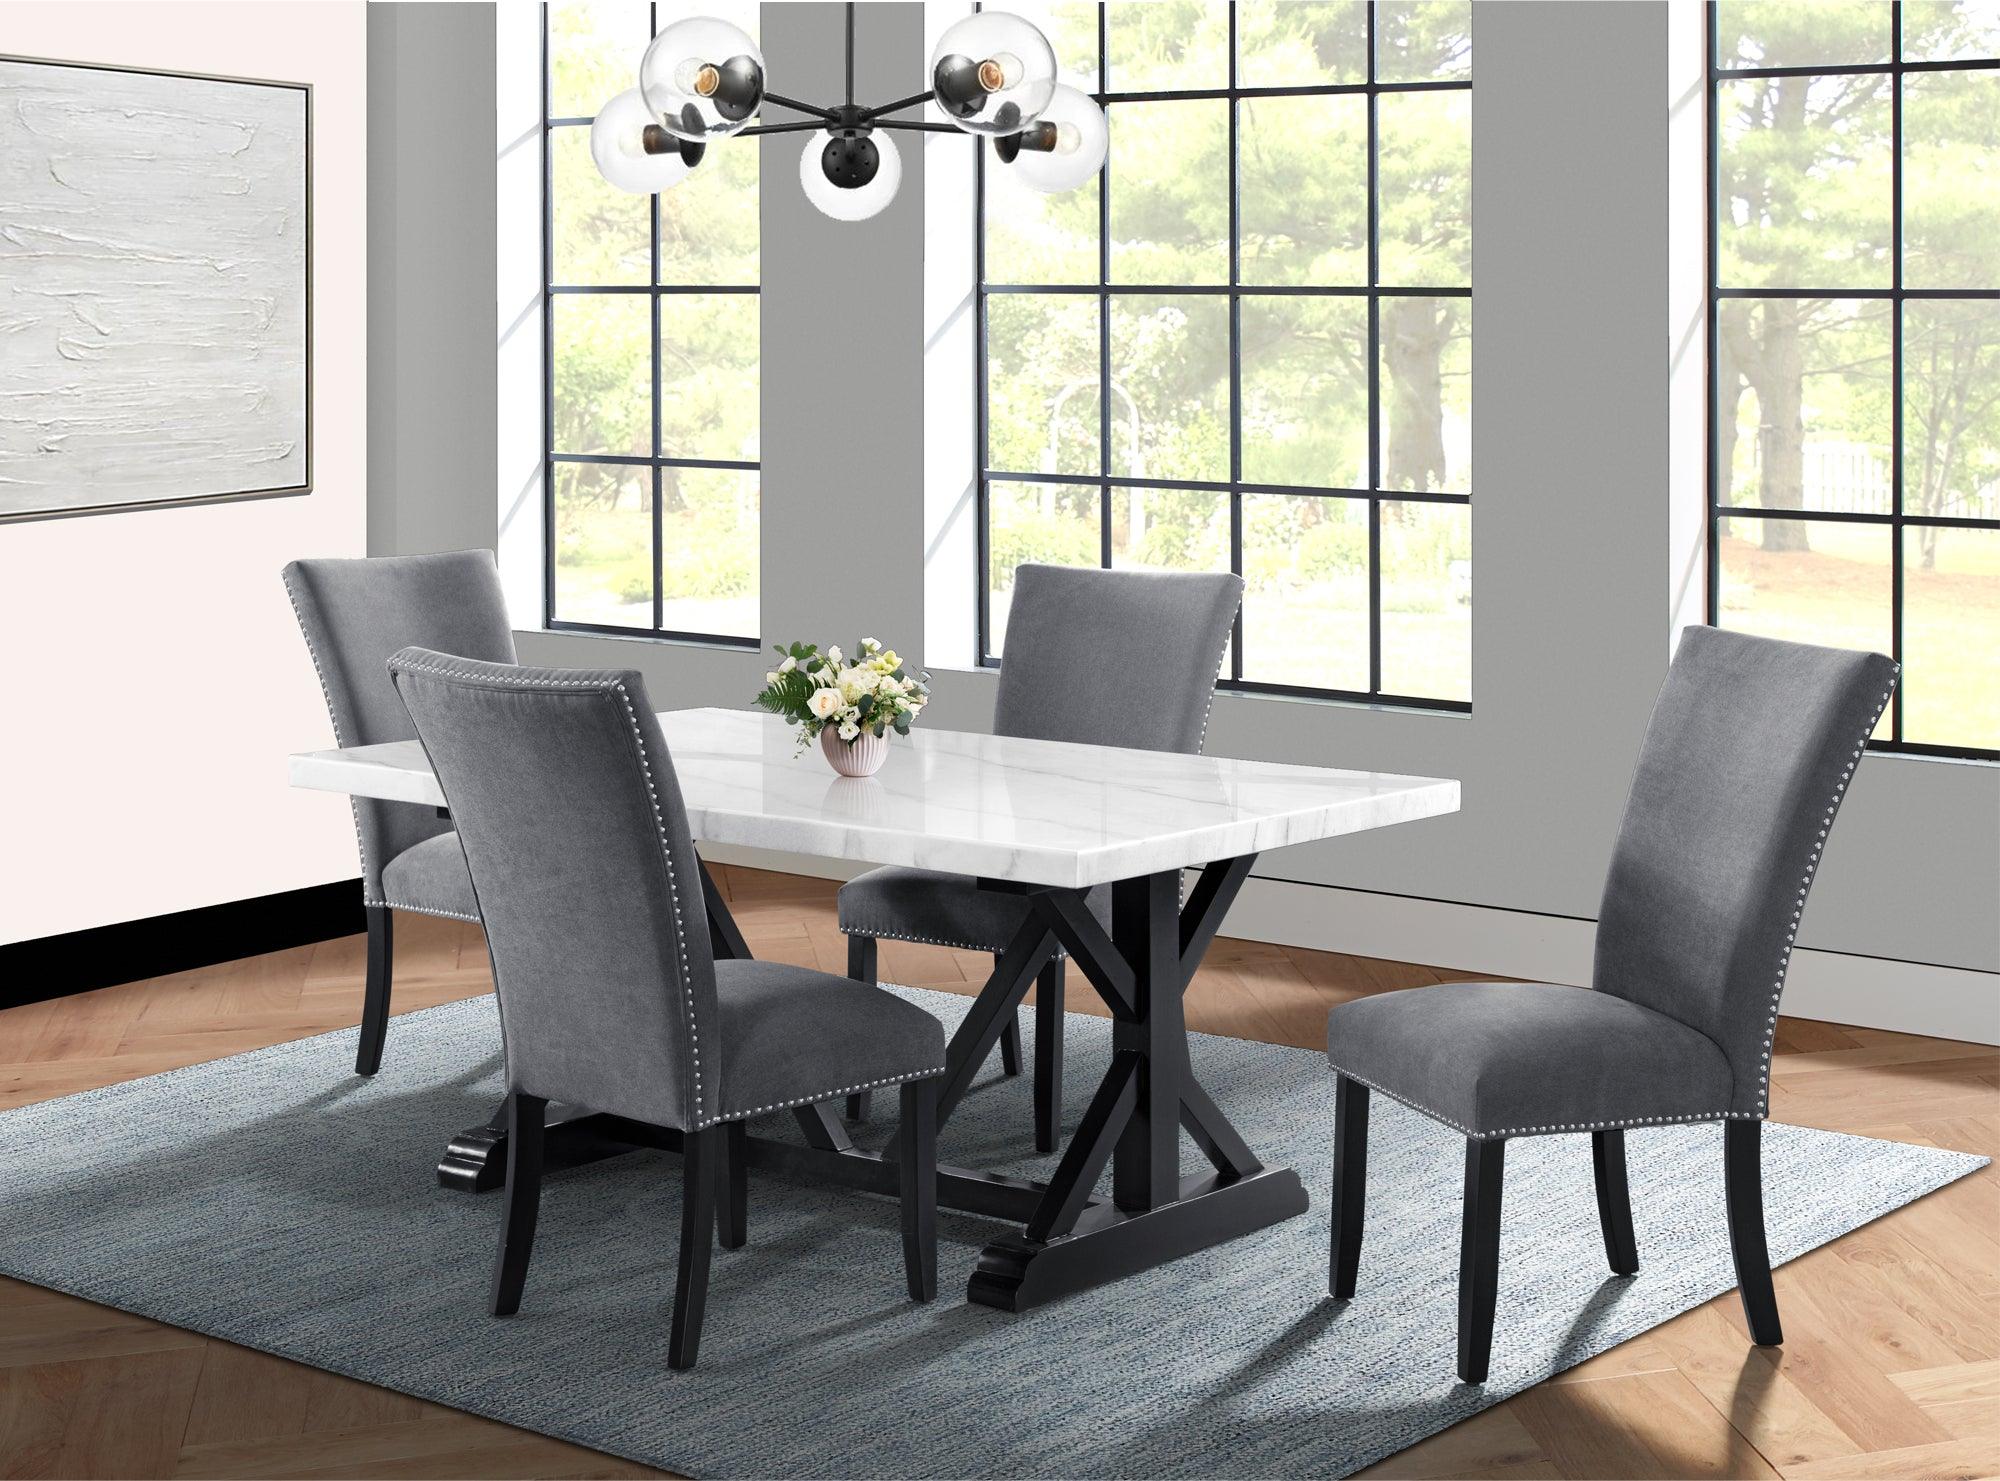 Elements Dining Sets - Stratton 5PC Standard Height Dining Set-Table & Four Chairs